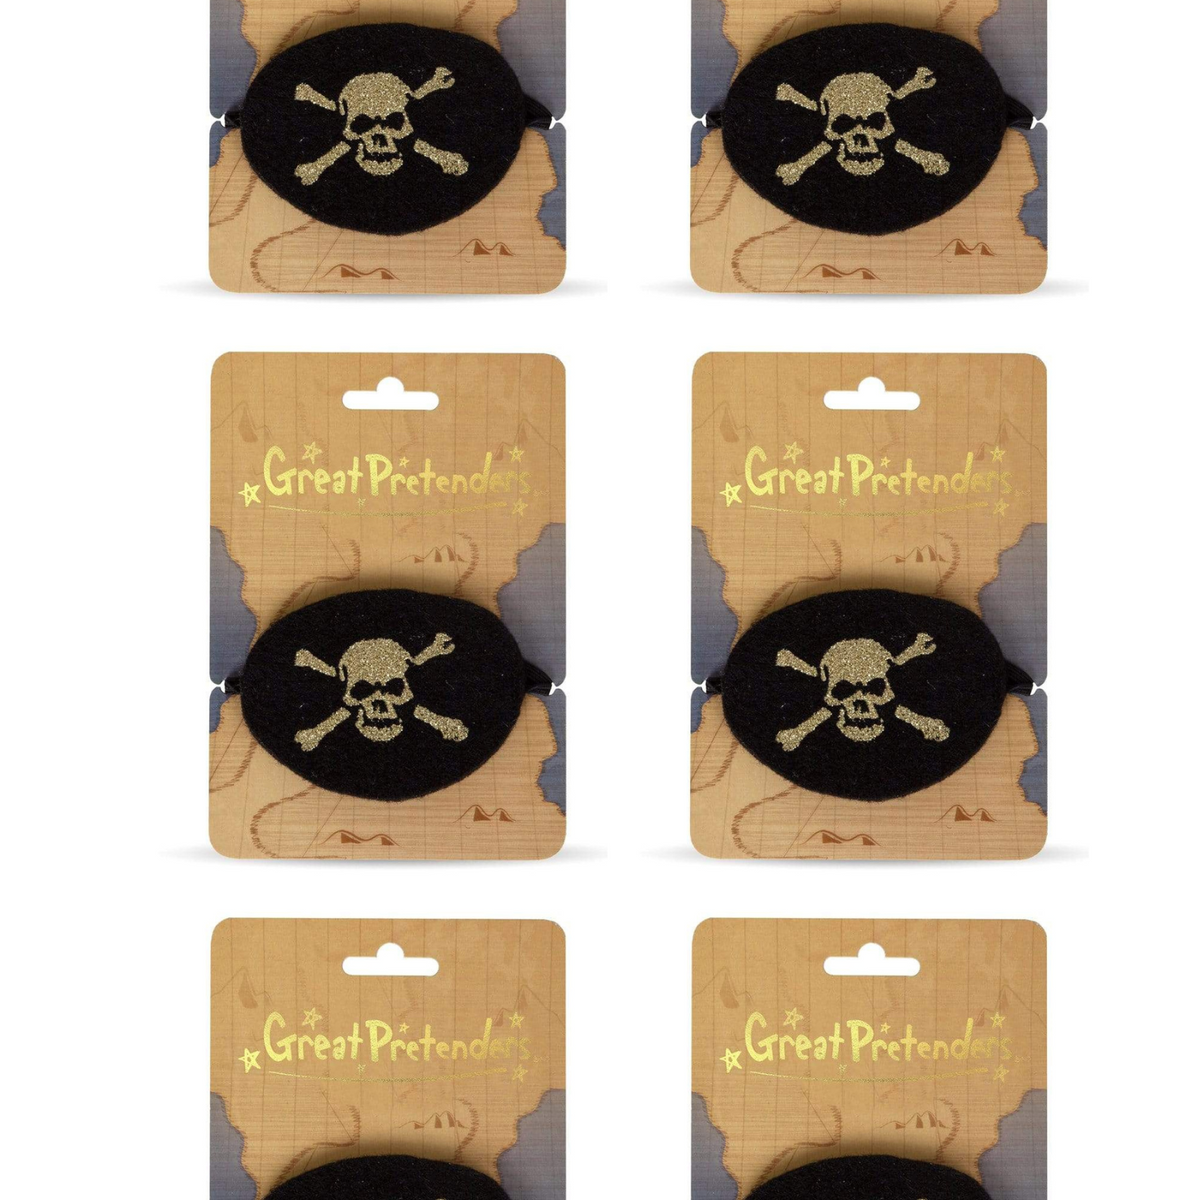 Special Offer - Sparkling Pirate Fun Patches